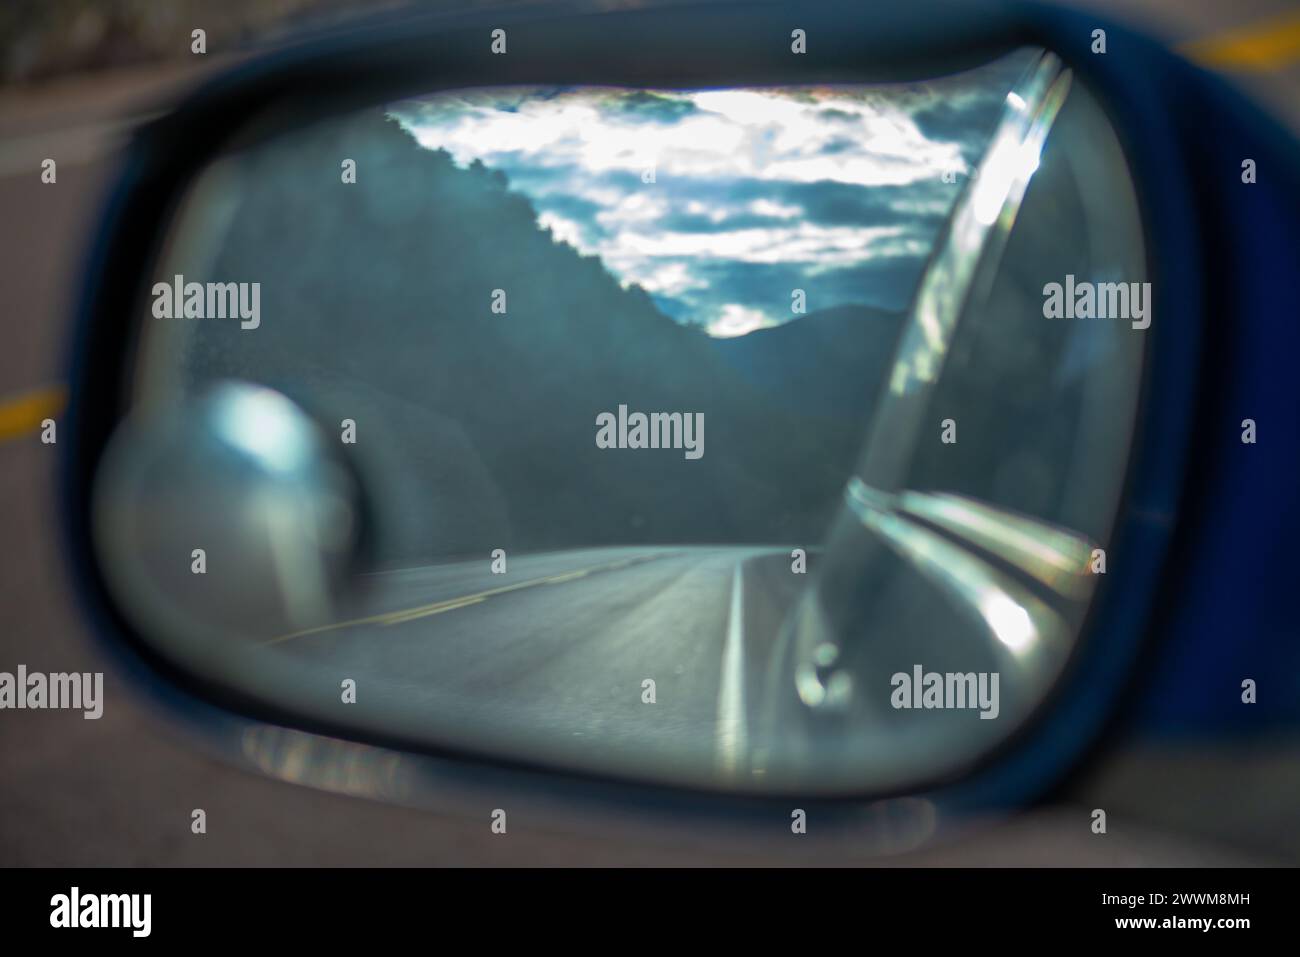 Through the rear-view window, the car captures a snapshot of the road, offering a glimpse of the journey's perspective and traffic behind. Stock Photo